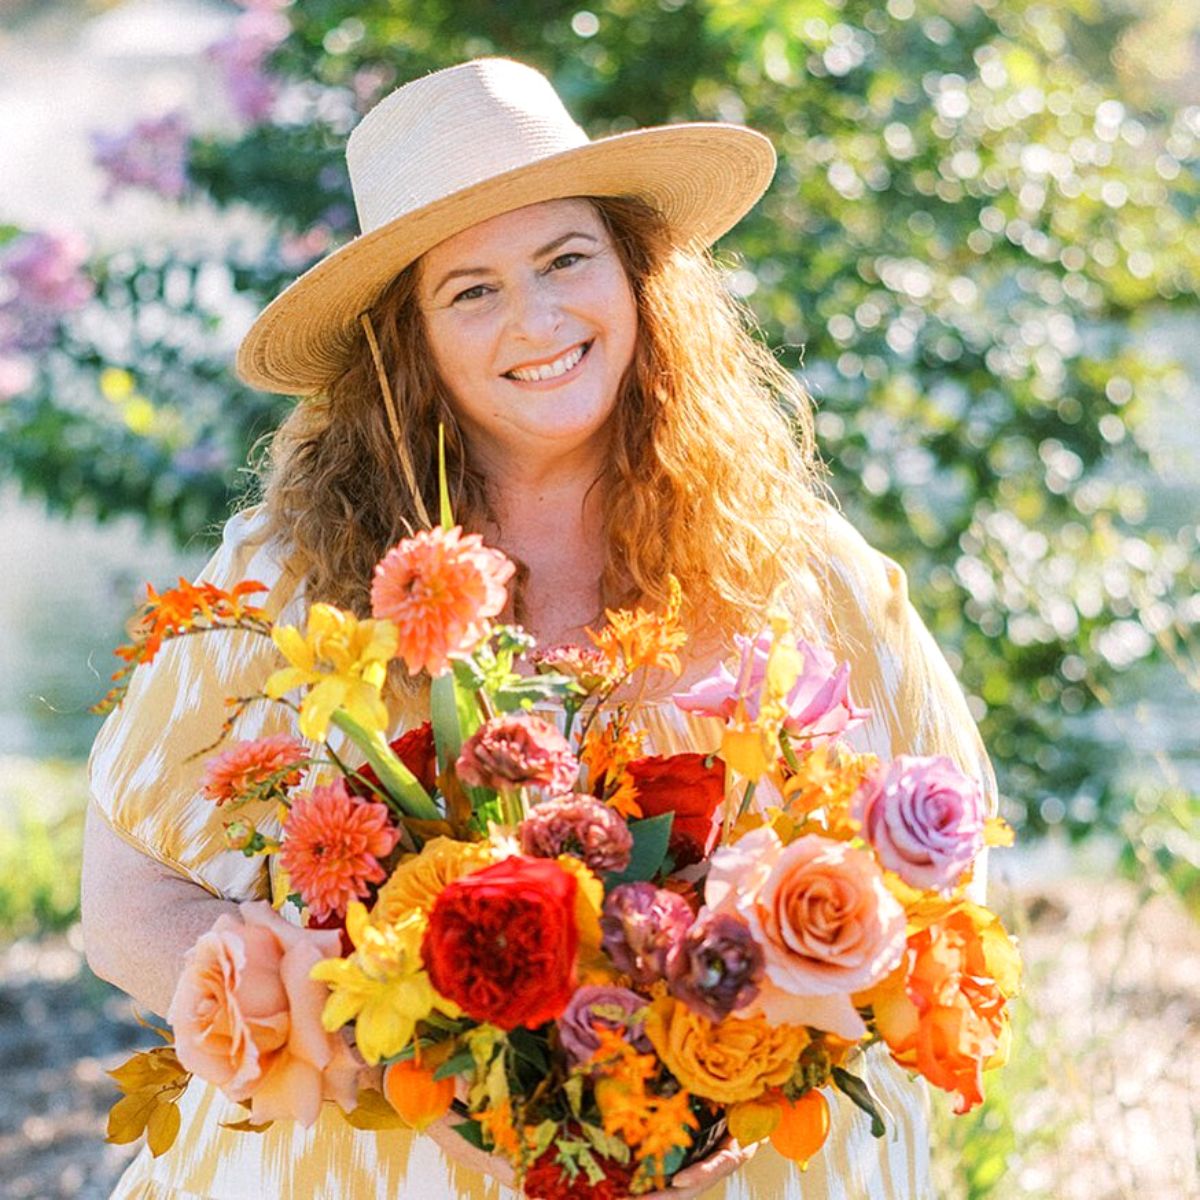 Dawn Weisberg florist from New Mexico